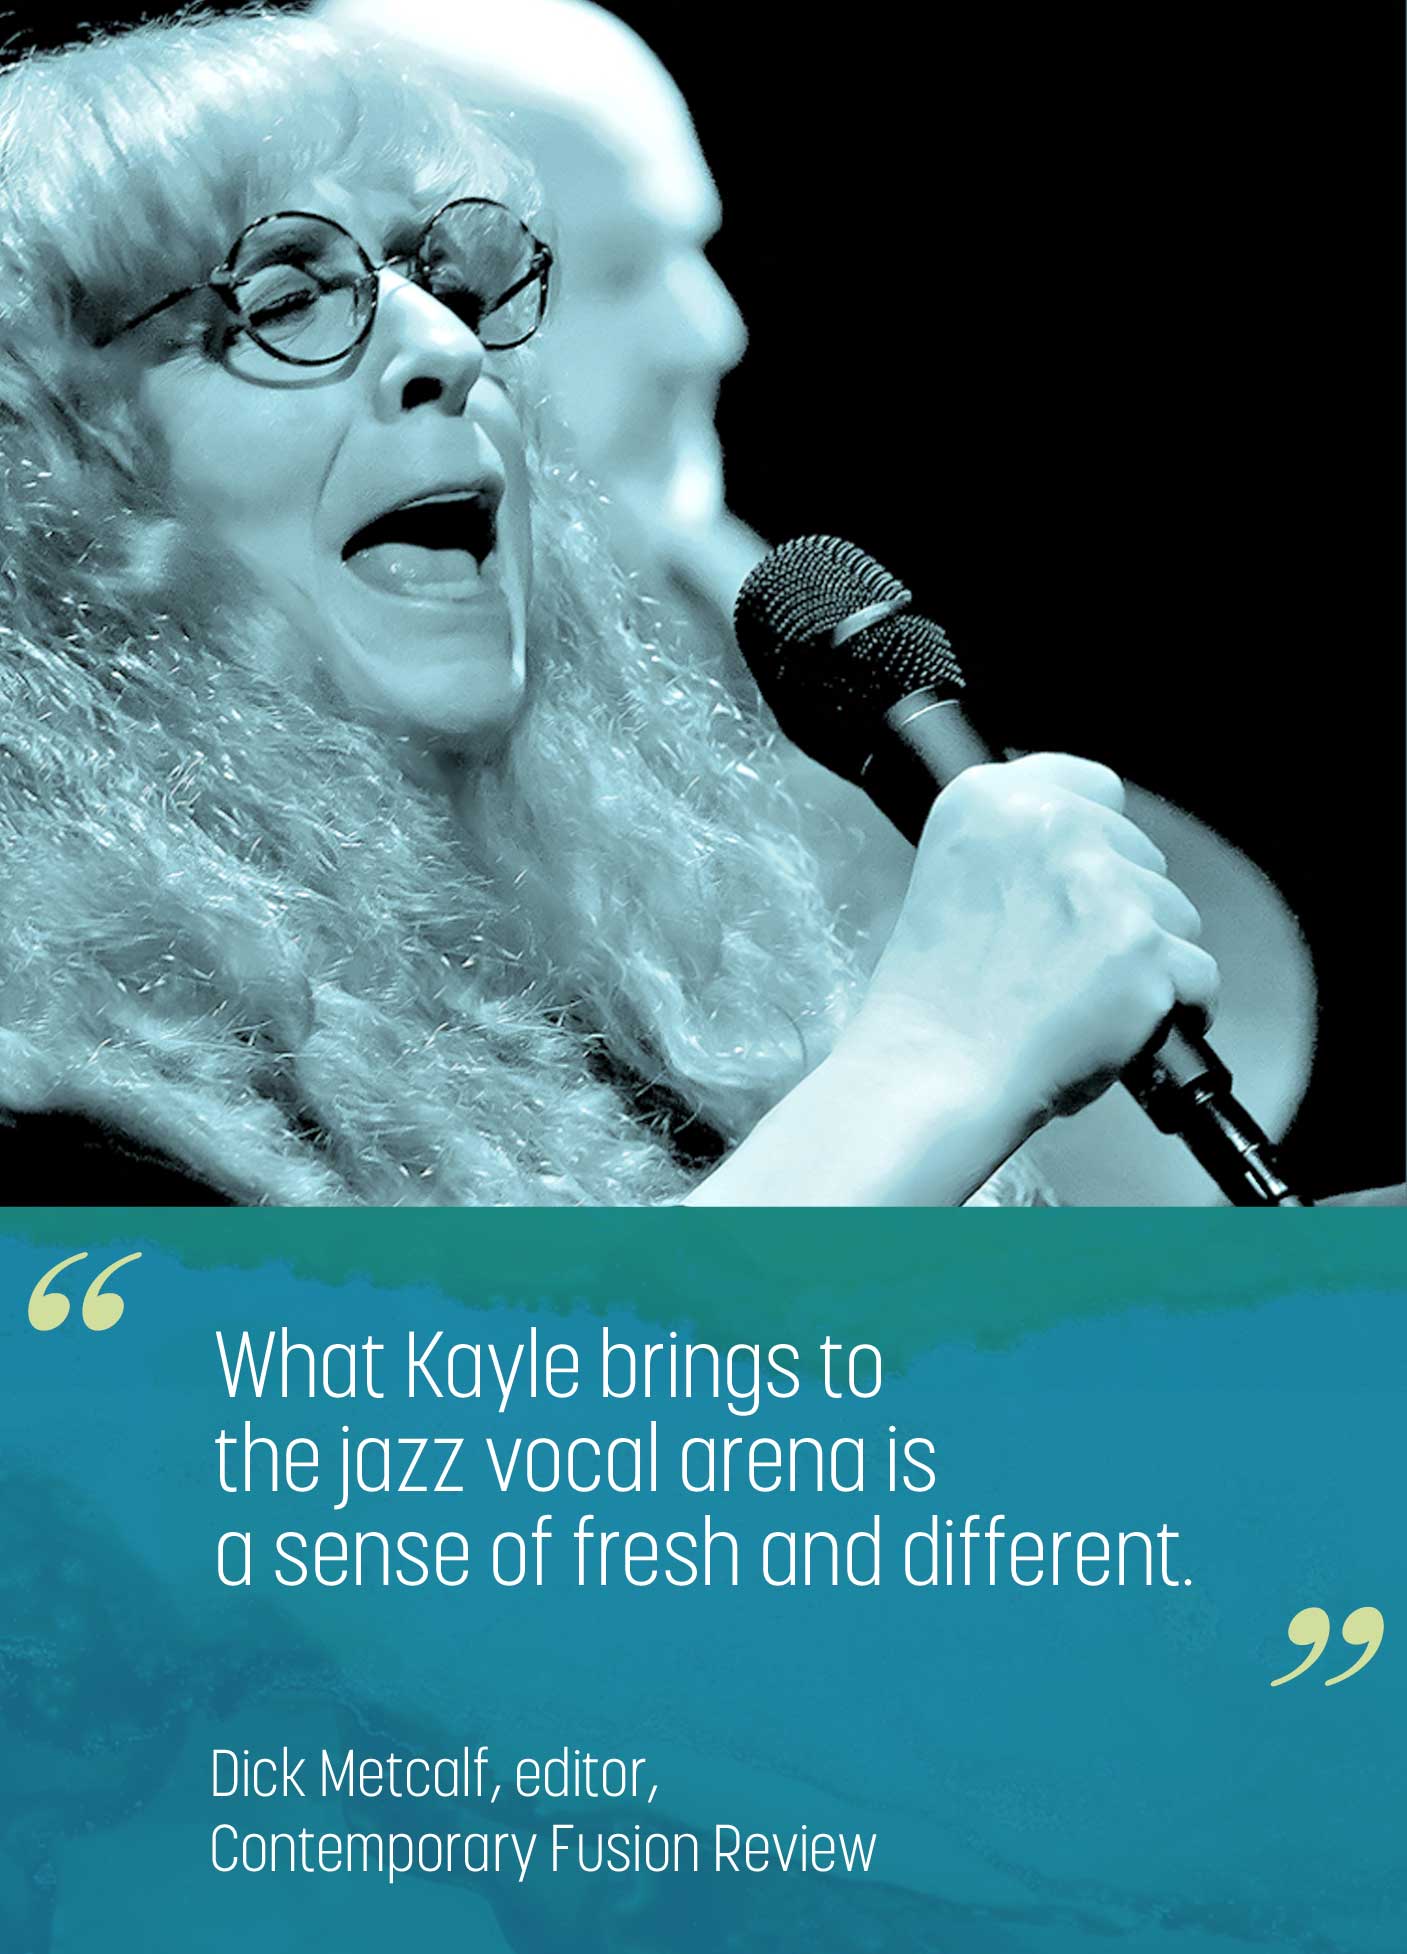 Kaylé Brecher photo / What Kayle brings to the jazz vocal arena is a sense of fresh and different. -Dick Metcalf, editor, Contemporary Fusion Review